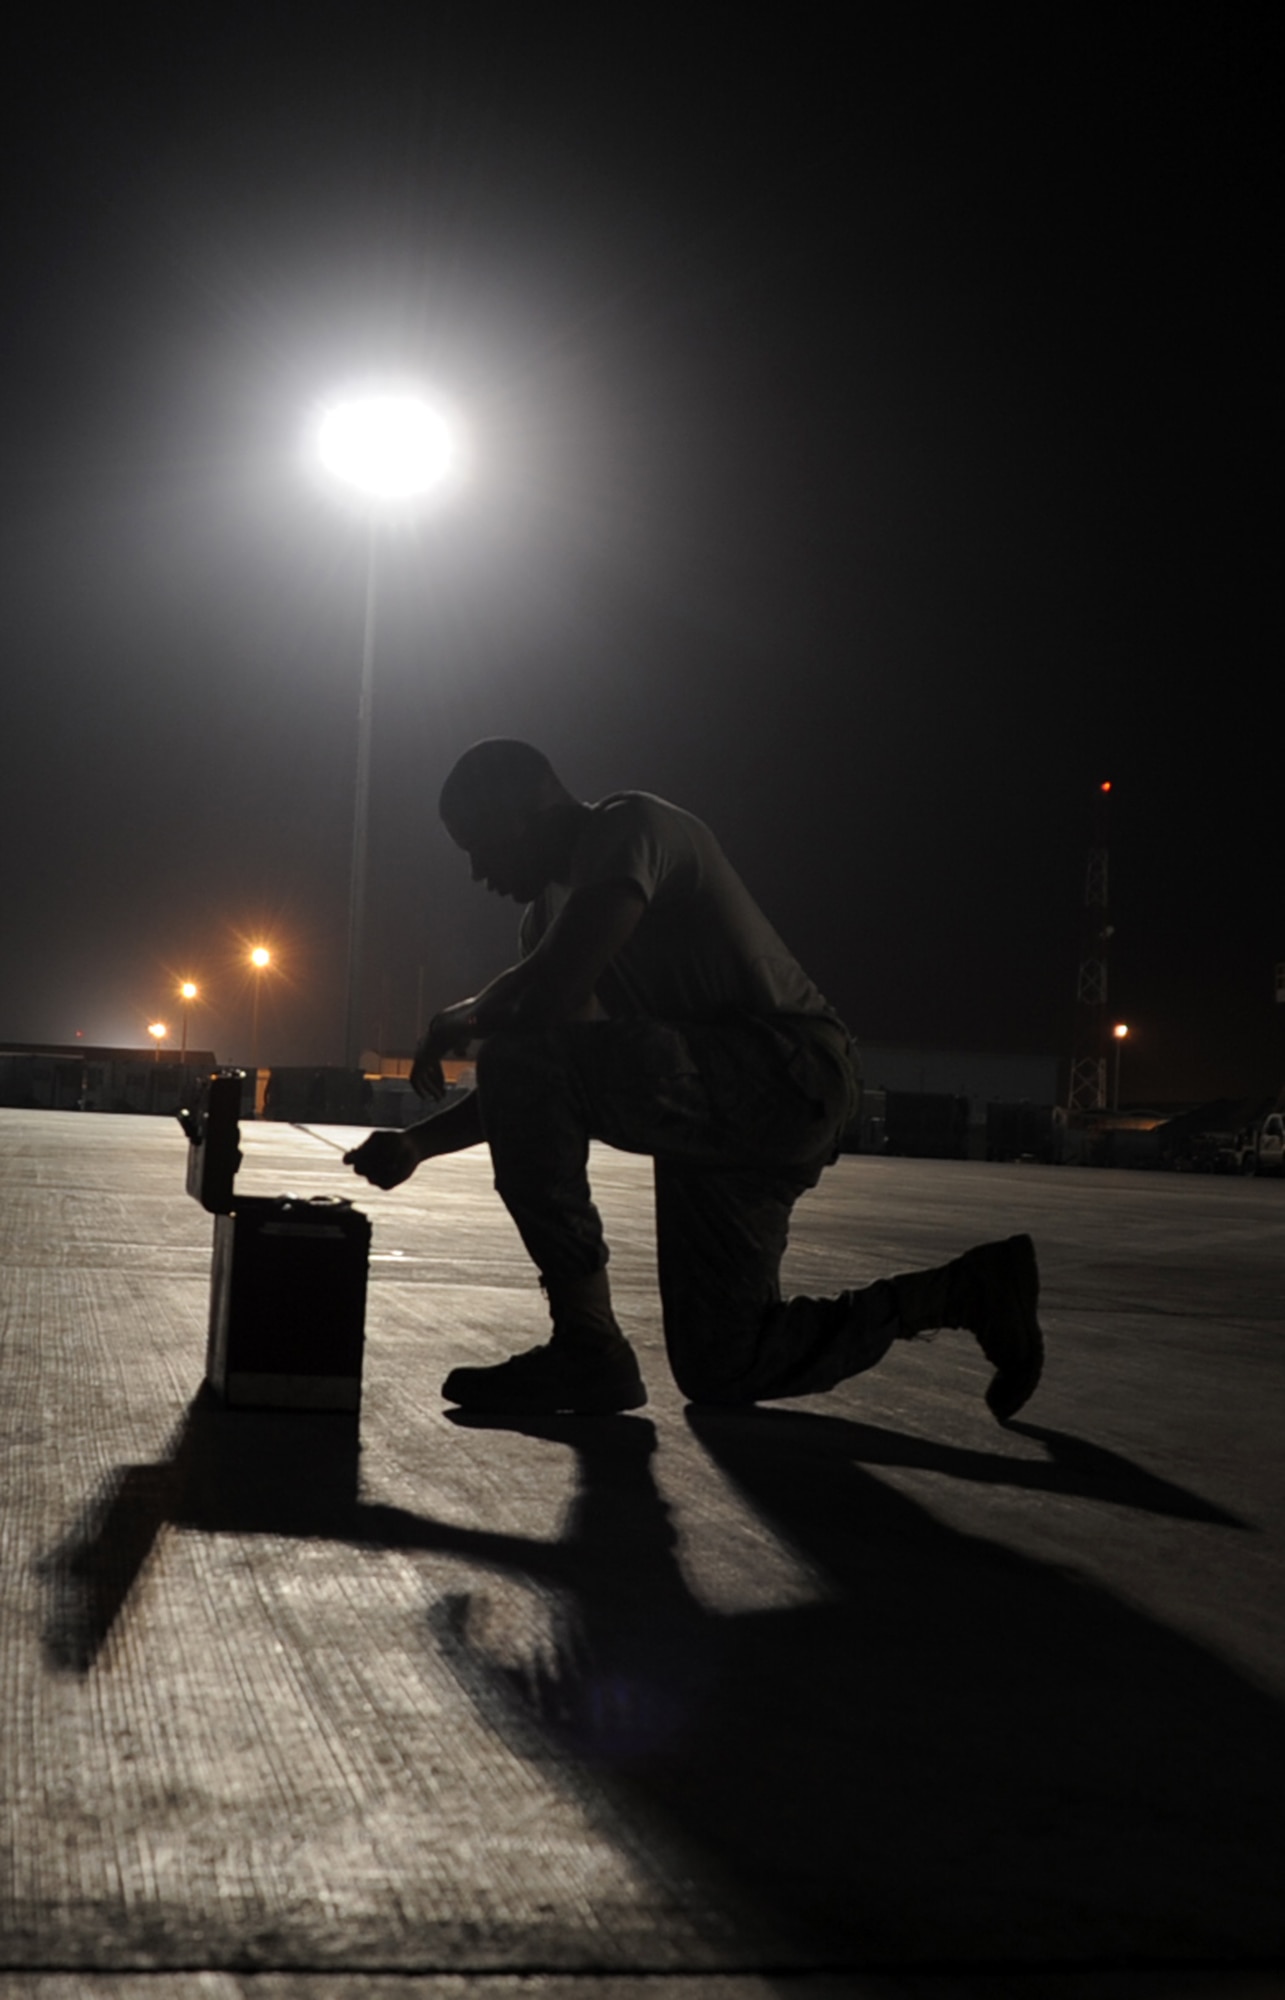 Senior Airman Justin Lassiter, a KC-10 Extender aerospace propulsion journeyman deployed with the 380th Expeditionary Aircraft Maintenance Squadron, reaches into a toolbox while working a night shift at a non-disclosed base in Southwest Asia. Here he is pictured on Jan. 31, 2010.  His primary mission is to fix and maintain KC-10 aircraft engines and systems. He is on his third deployment with the 380th EAMXS. Airman Lassiter is deployed from the 605th Aircraft Maintenance Squadron at Joint Base McGuire-Dix-Lakehurst, N.J., and his hometown is Wilson, N.C. (U.S. Air Force Photo/Master Sgt. Scott T. Sturkol/Released)